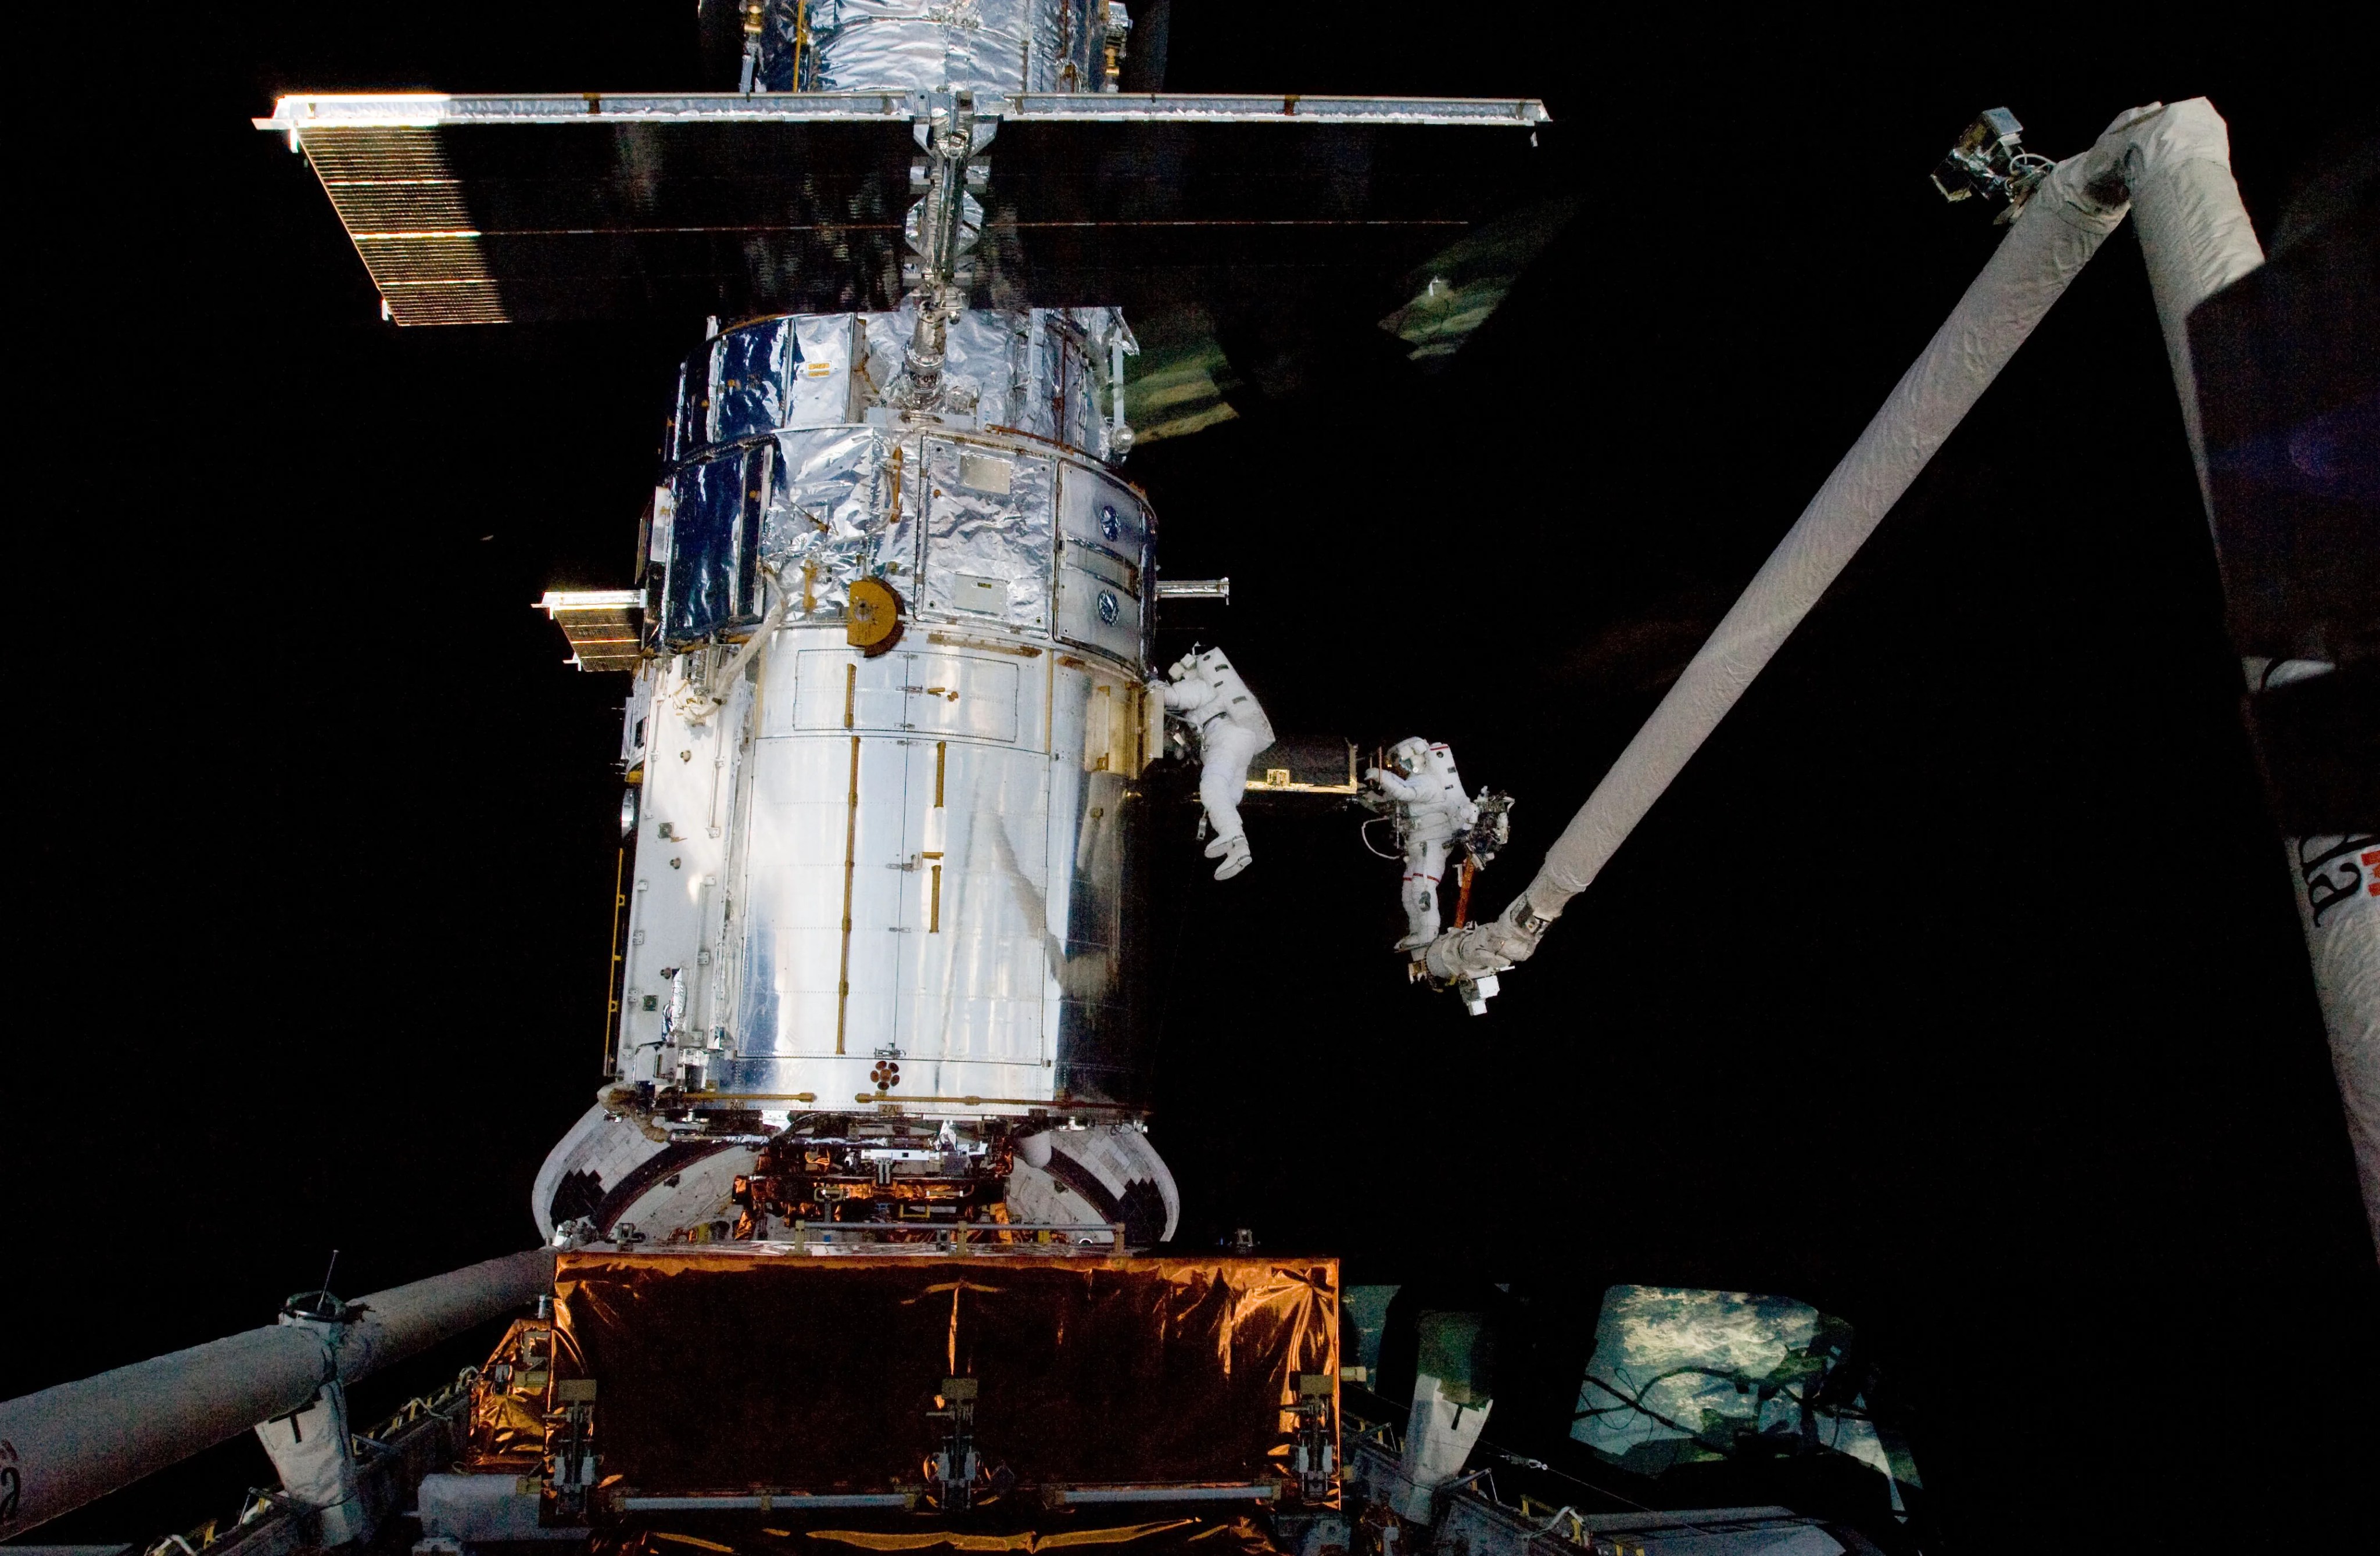 Two astronauts in white space suits tethered on a robotic arm servicing the Hubble Space Telescope in space.